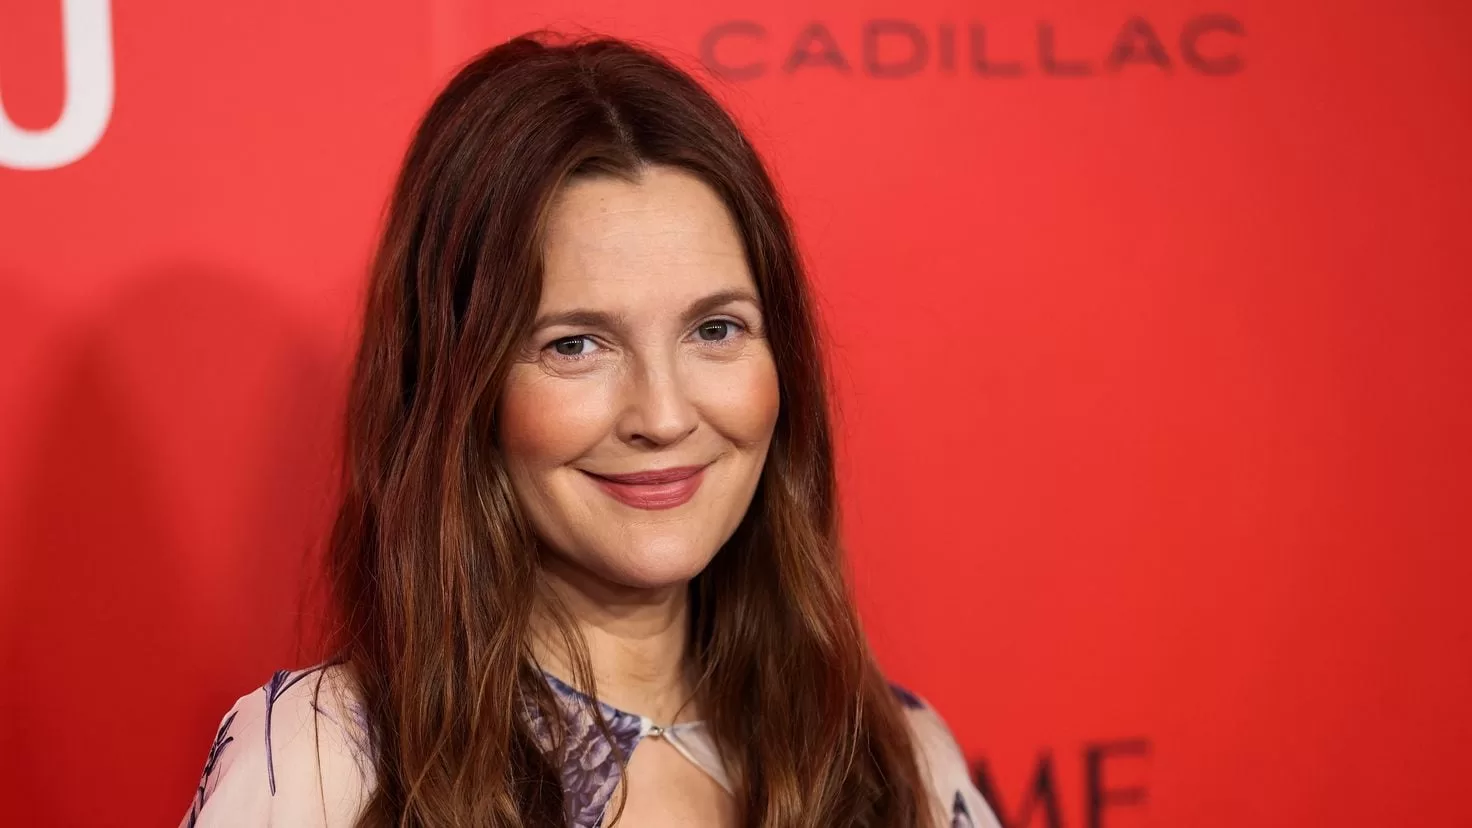 Drew Barrymore, worried about her highly addictive personality
